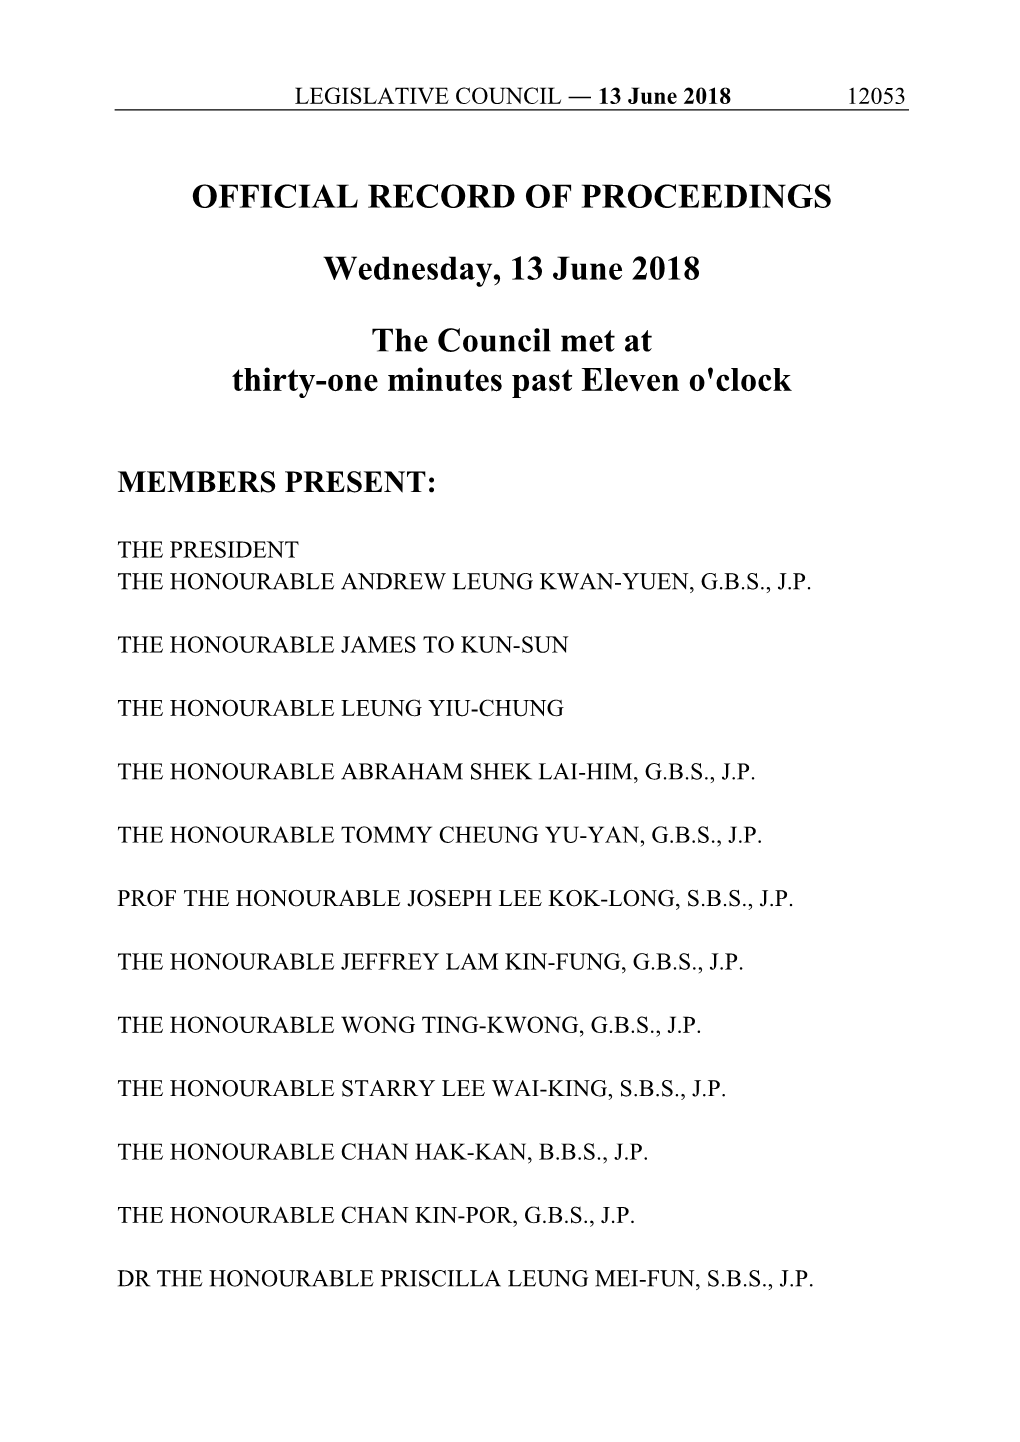 OFFICIAL RECORD of PROCEEDINGS Wednesday, 13 June 2018 the Council Met at Thirty-One Minutes Past Eleven O'clock